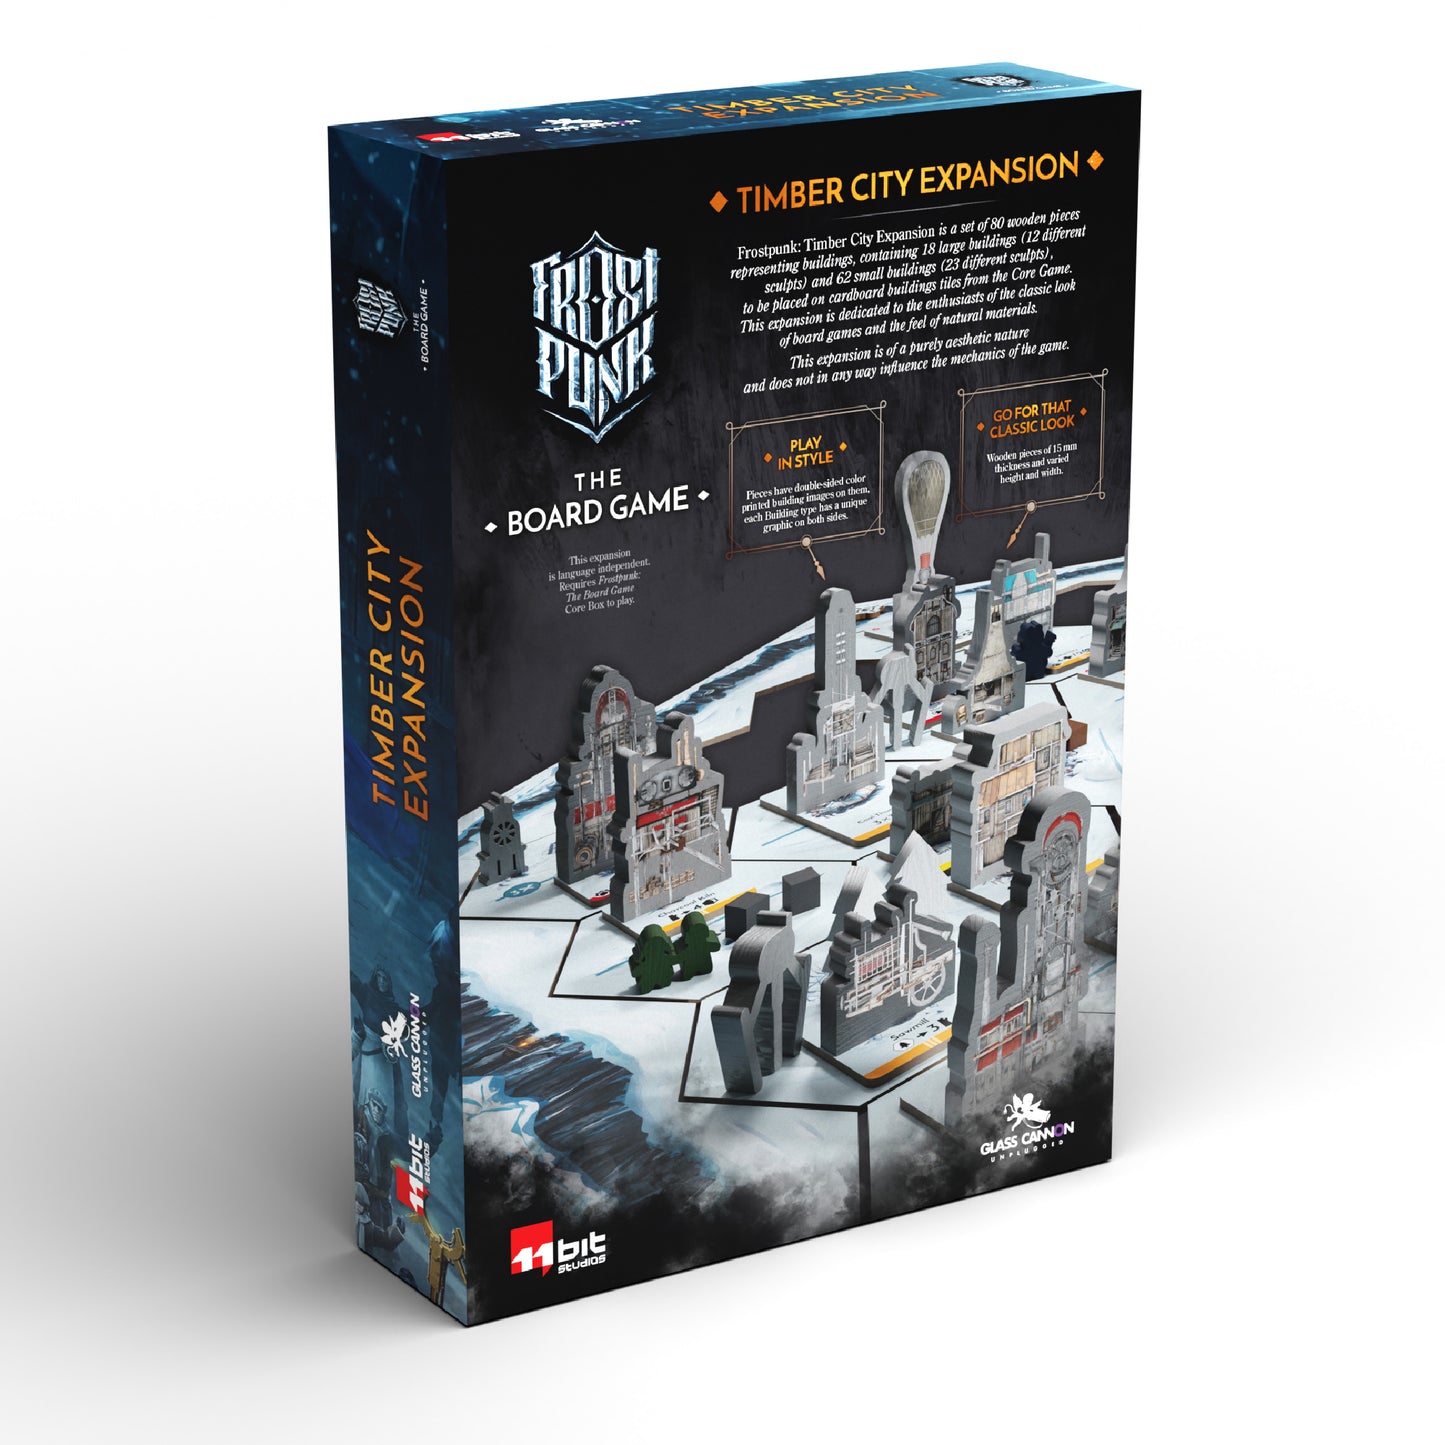 Frostpunk: The Board Game: Timber City